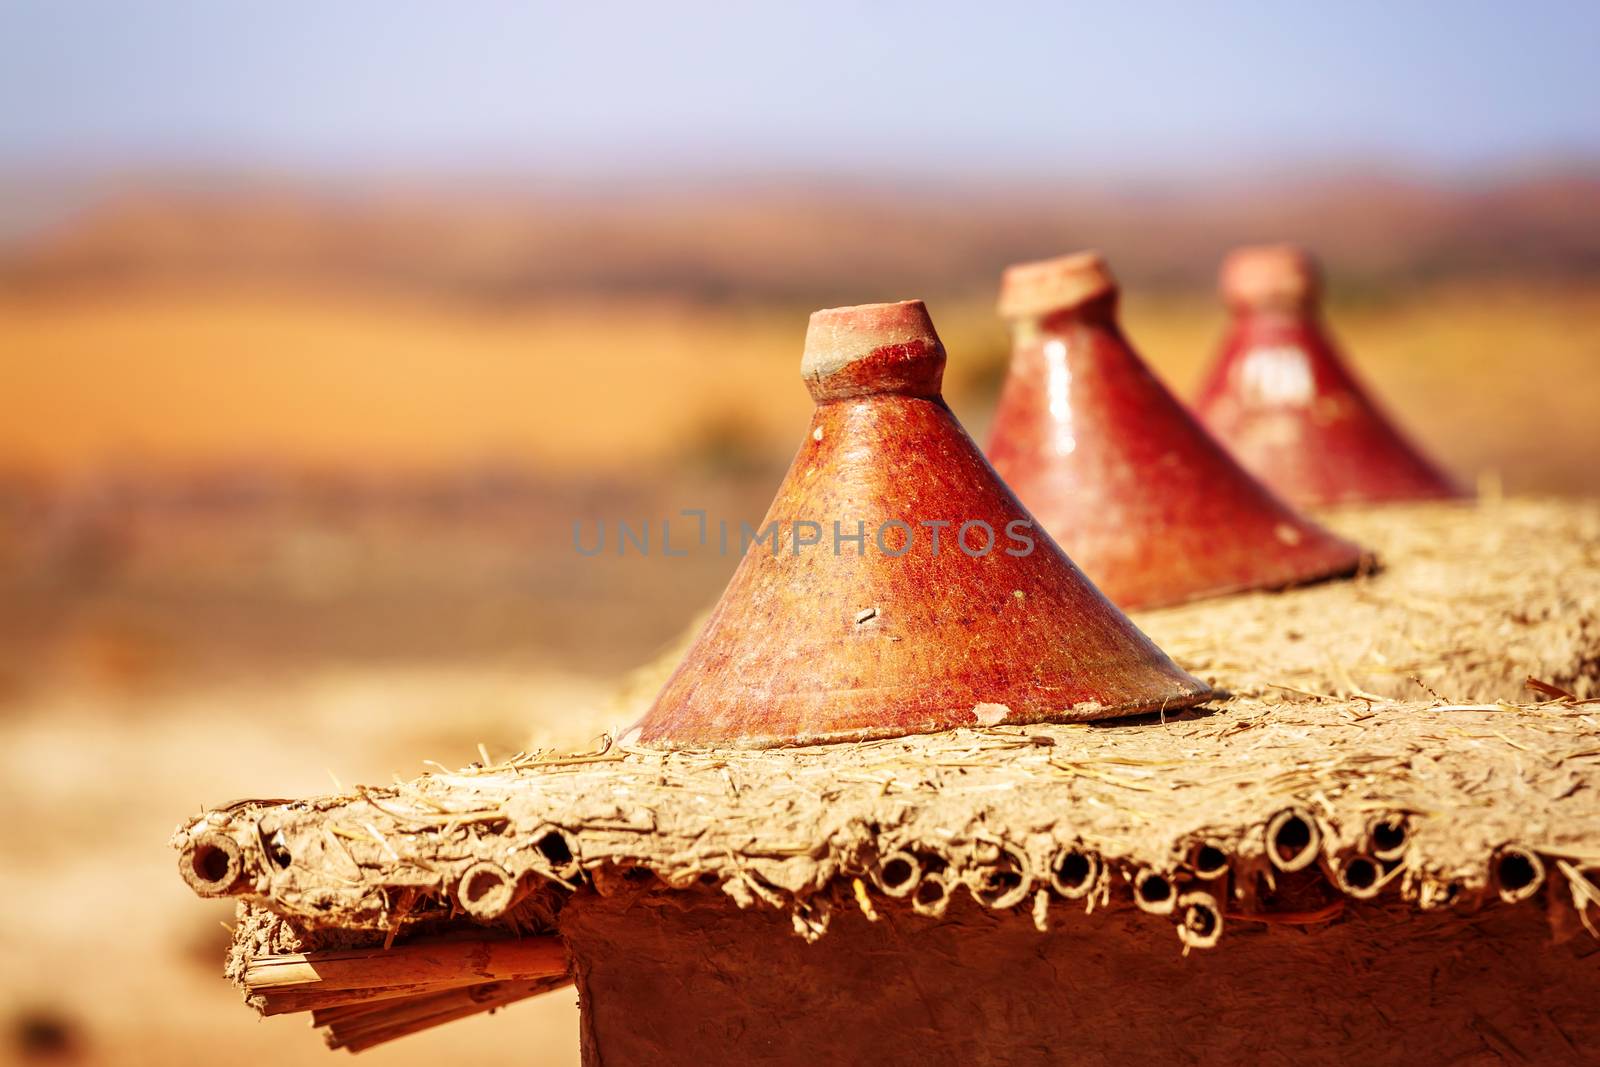 production of traditional Moroccan tajine pots used for cooking